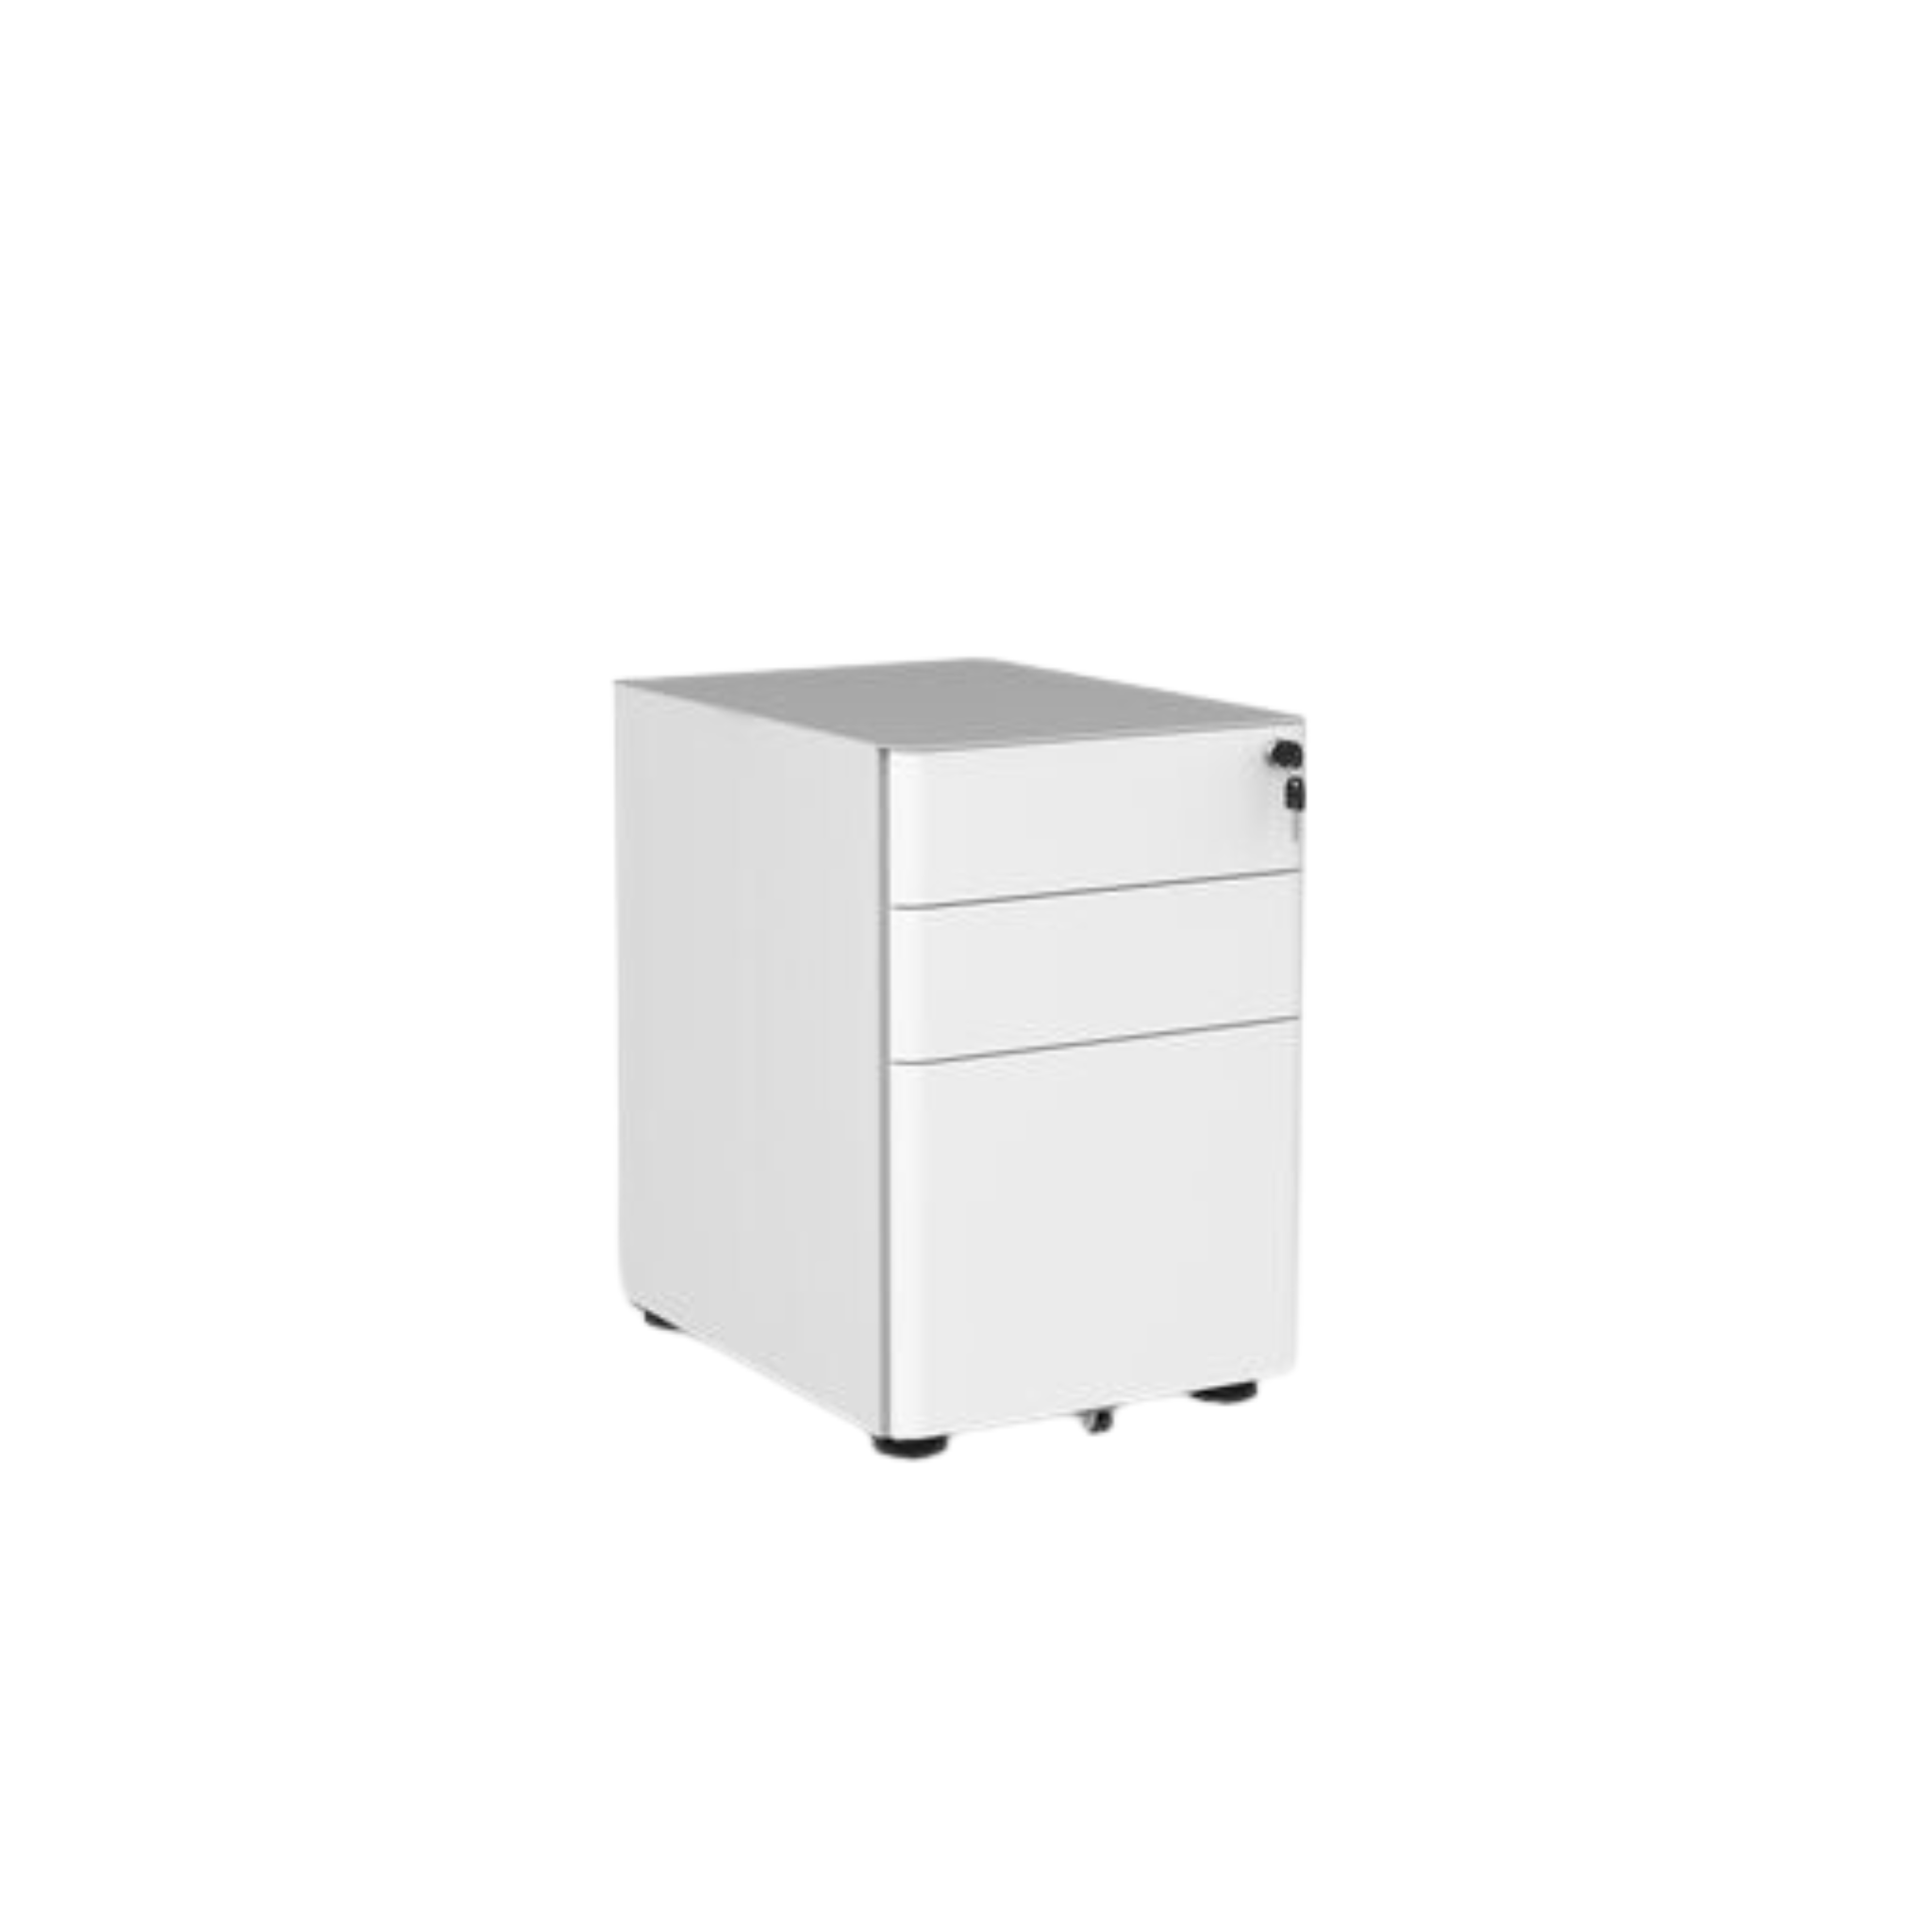 Agile lockable metal mobile with 2 stationery drawers and 1 filing drawer in white